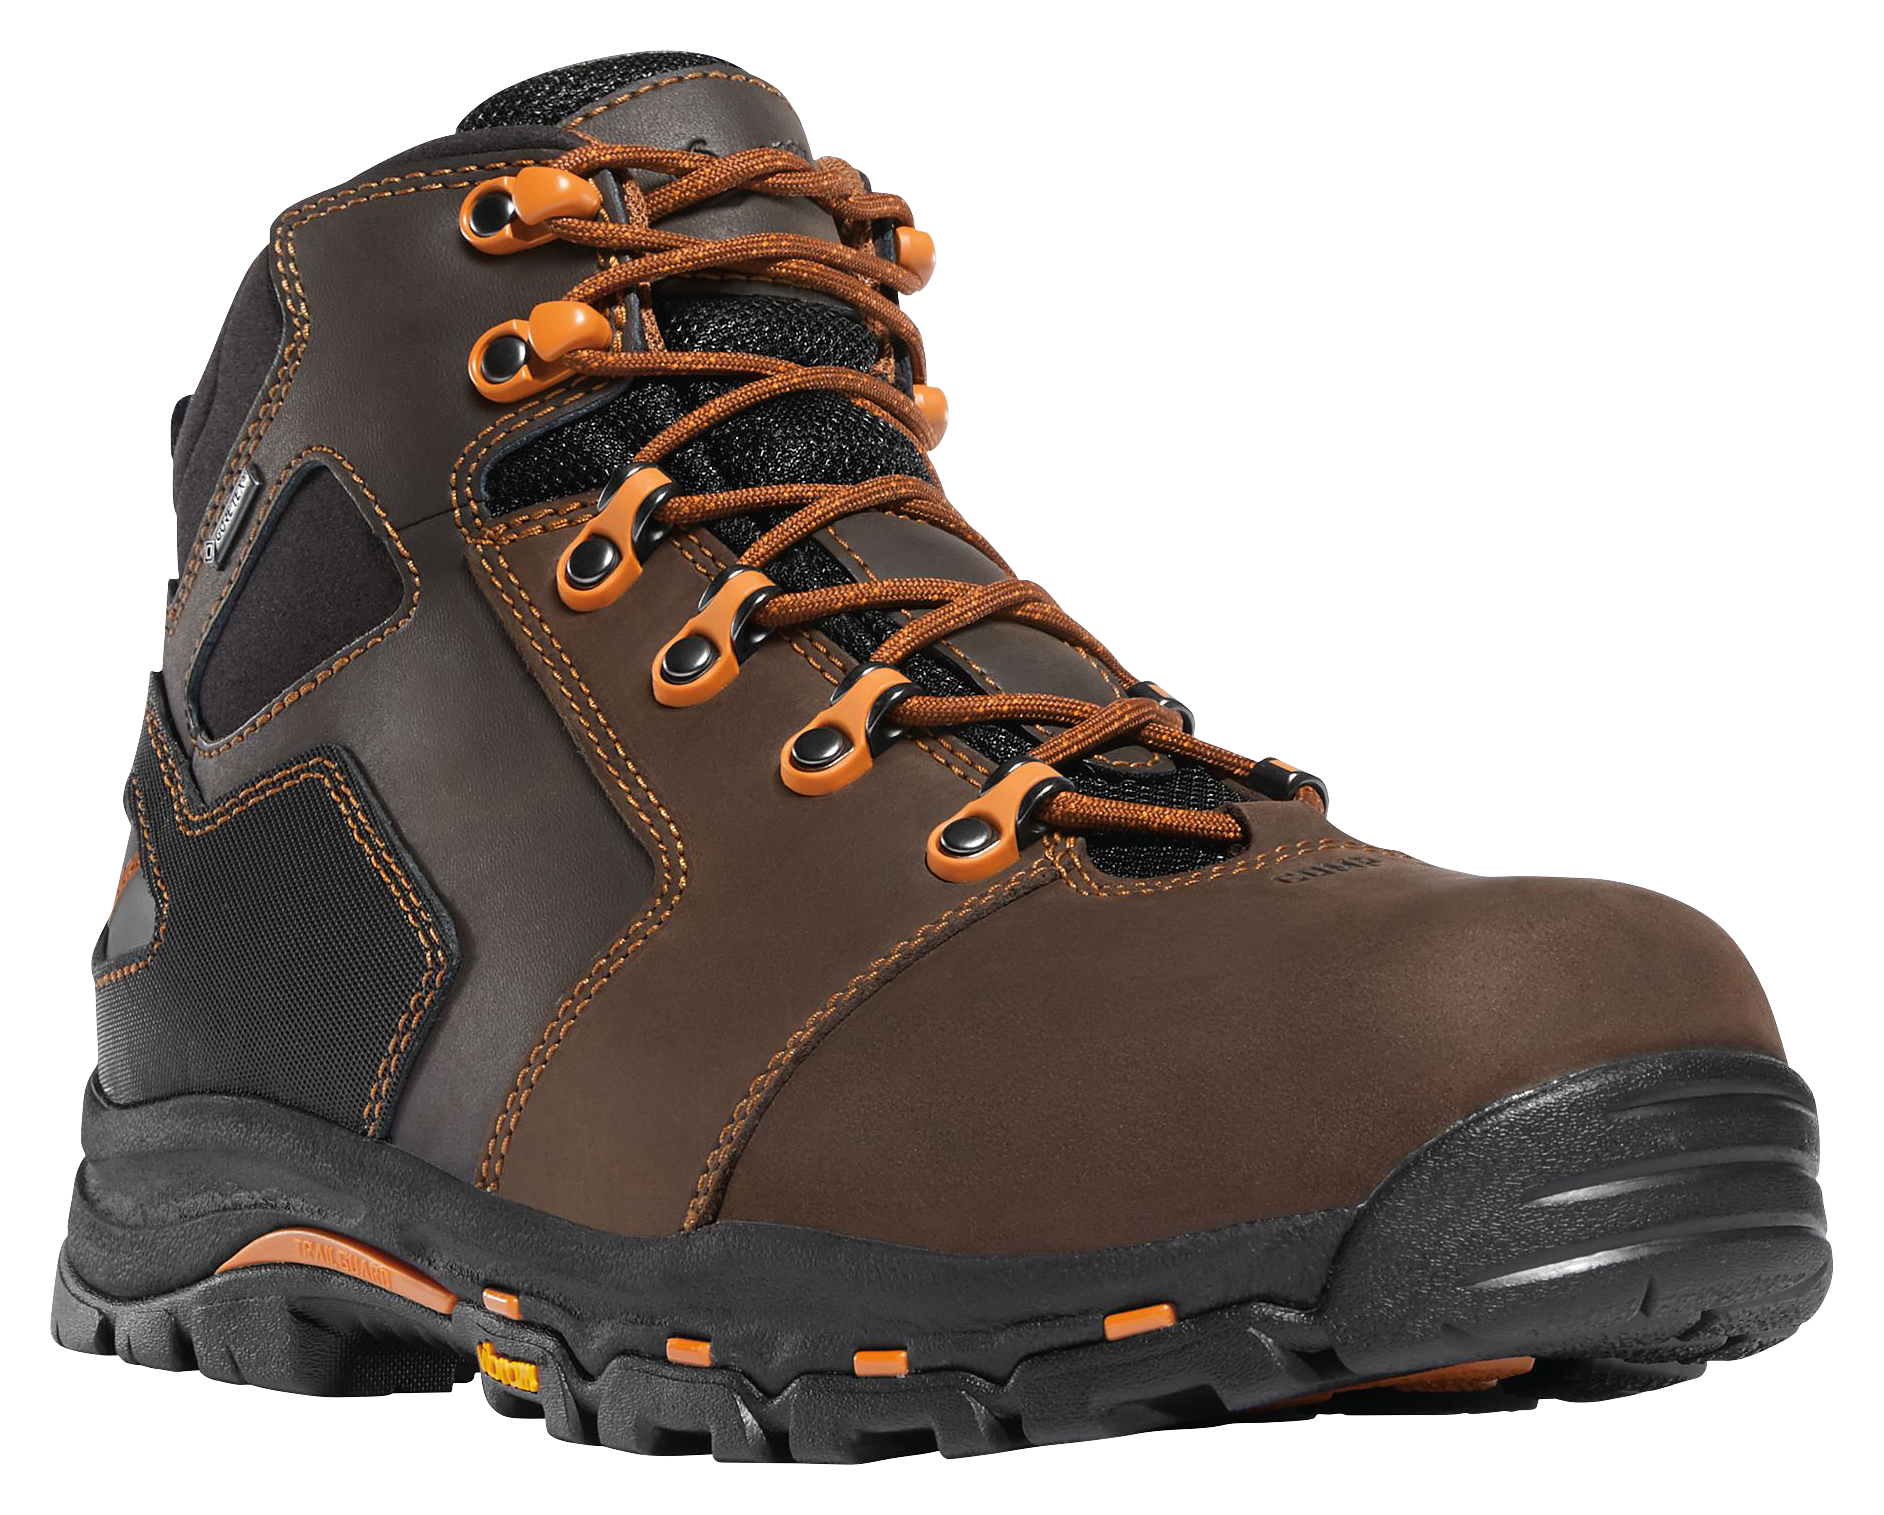 Danner Vicious 4.5'' GORE-TEX EH Work Boots for Men